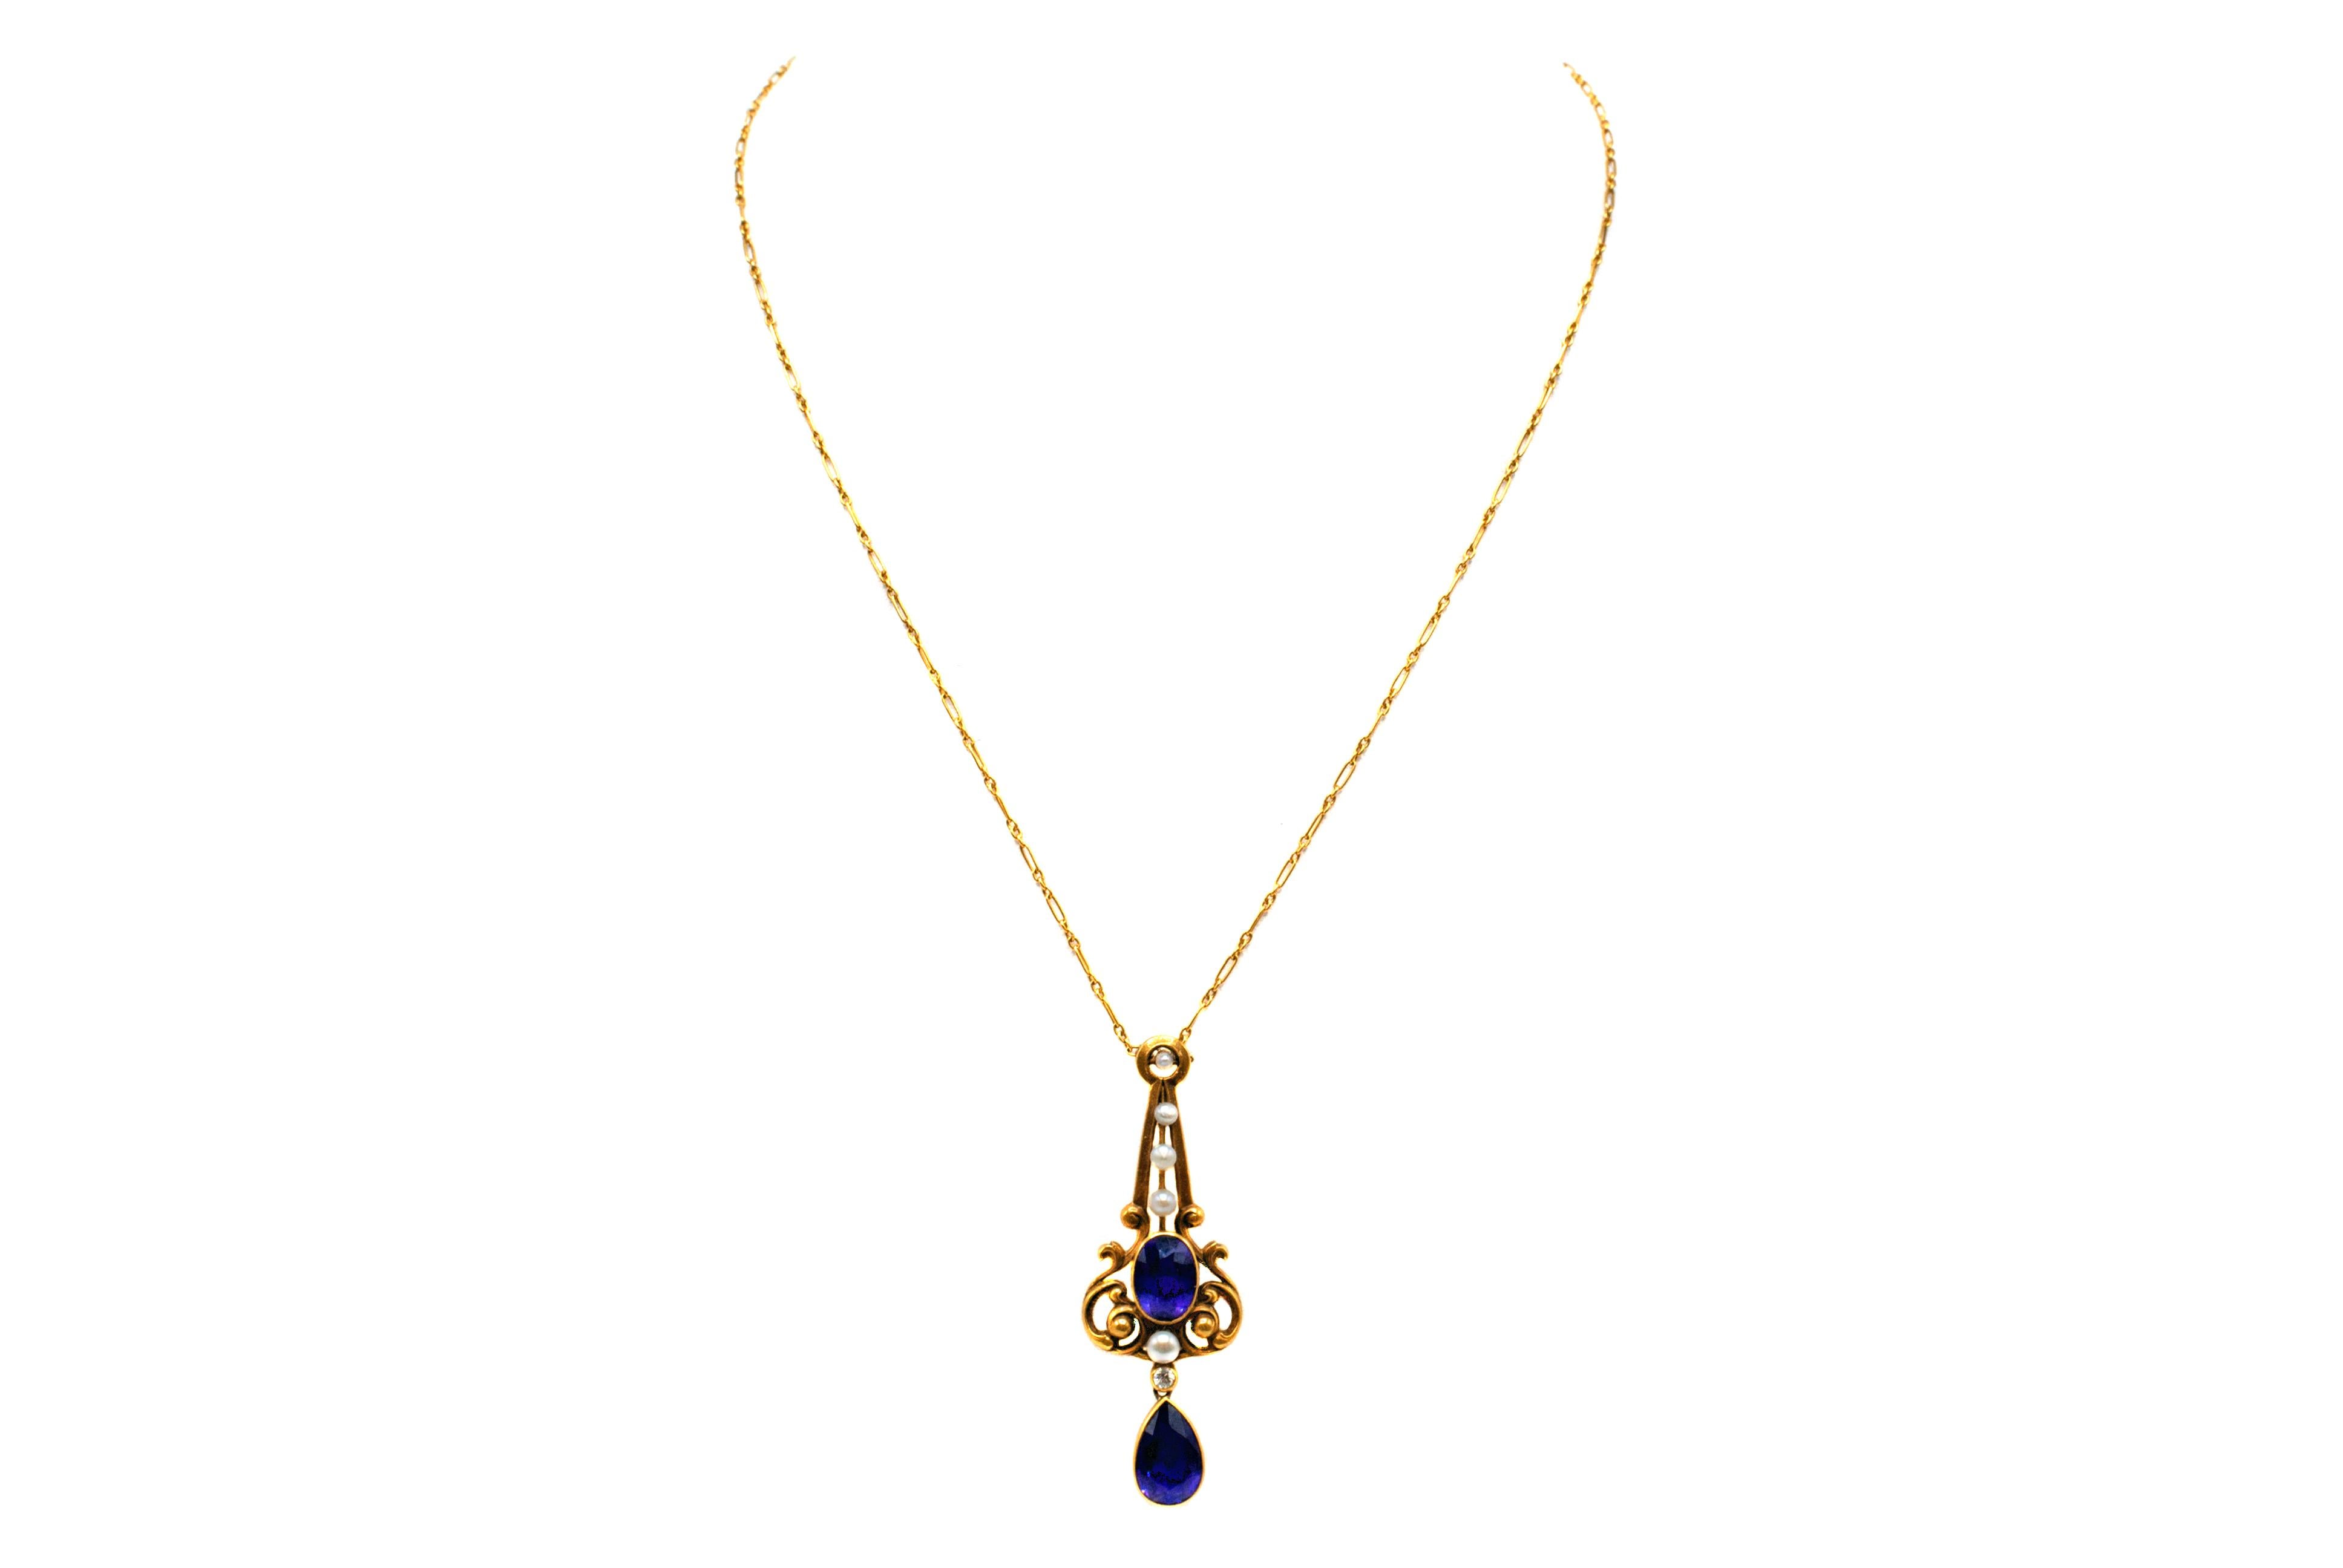 This unique Art Nouveau pendant from ca. 1890 features 2 deep velvety purple amethysts and 5 seed pearls accented with one round bright white old cut diamond. The beautifully handcrafted pendant exhibits the typical designs from this era with